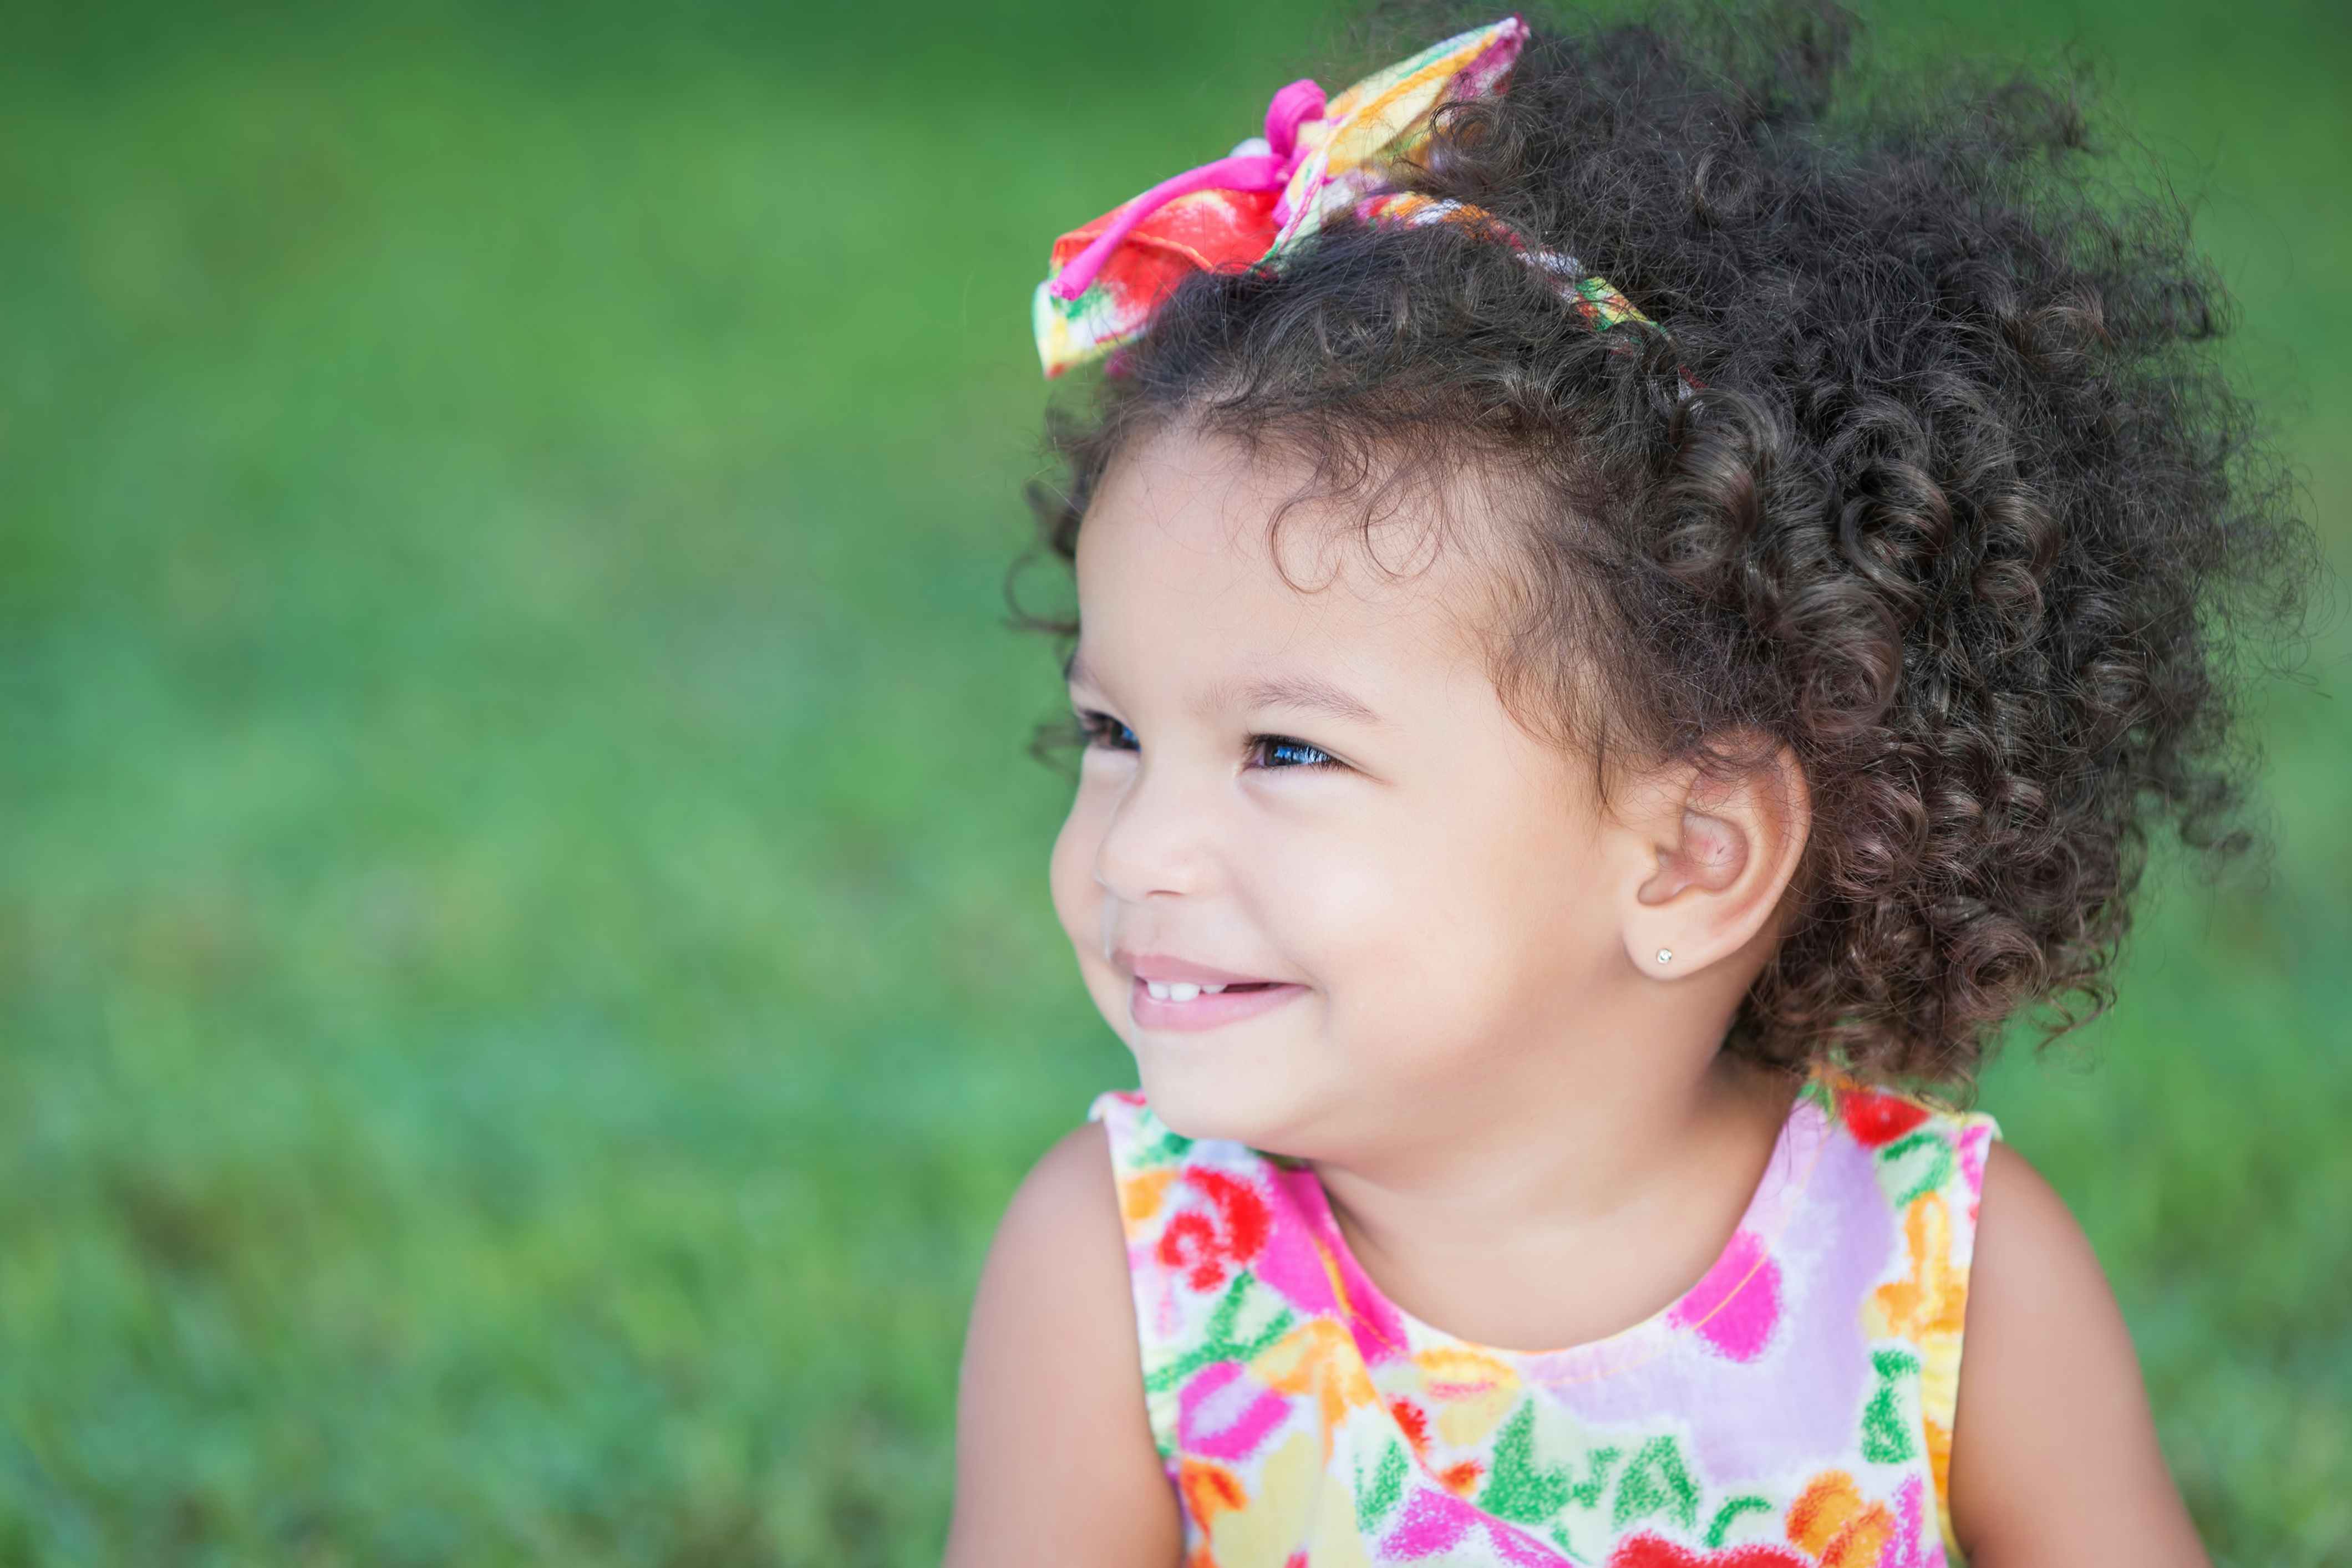 A little girl with natural curls sitting outside smiling.